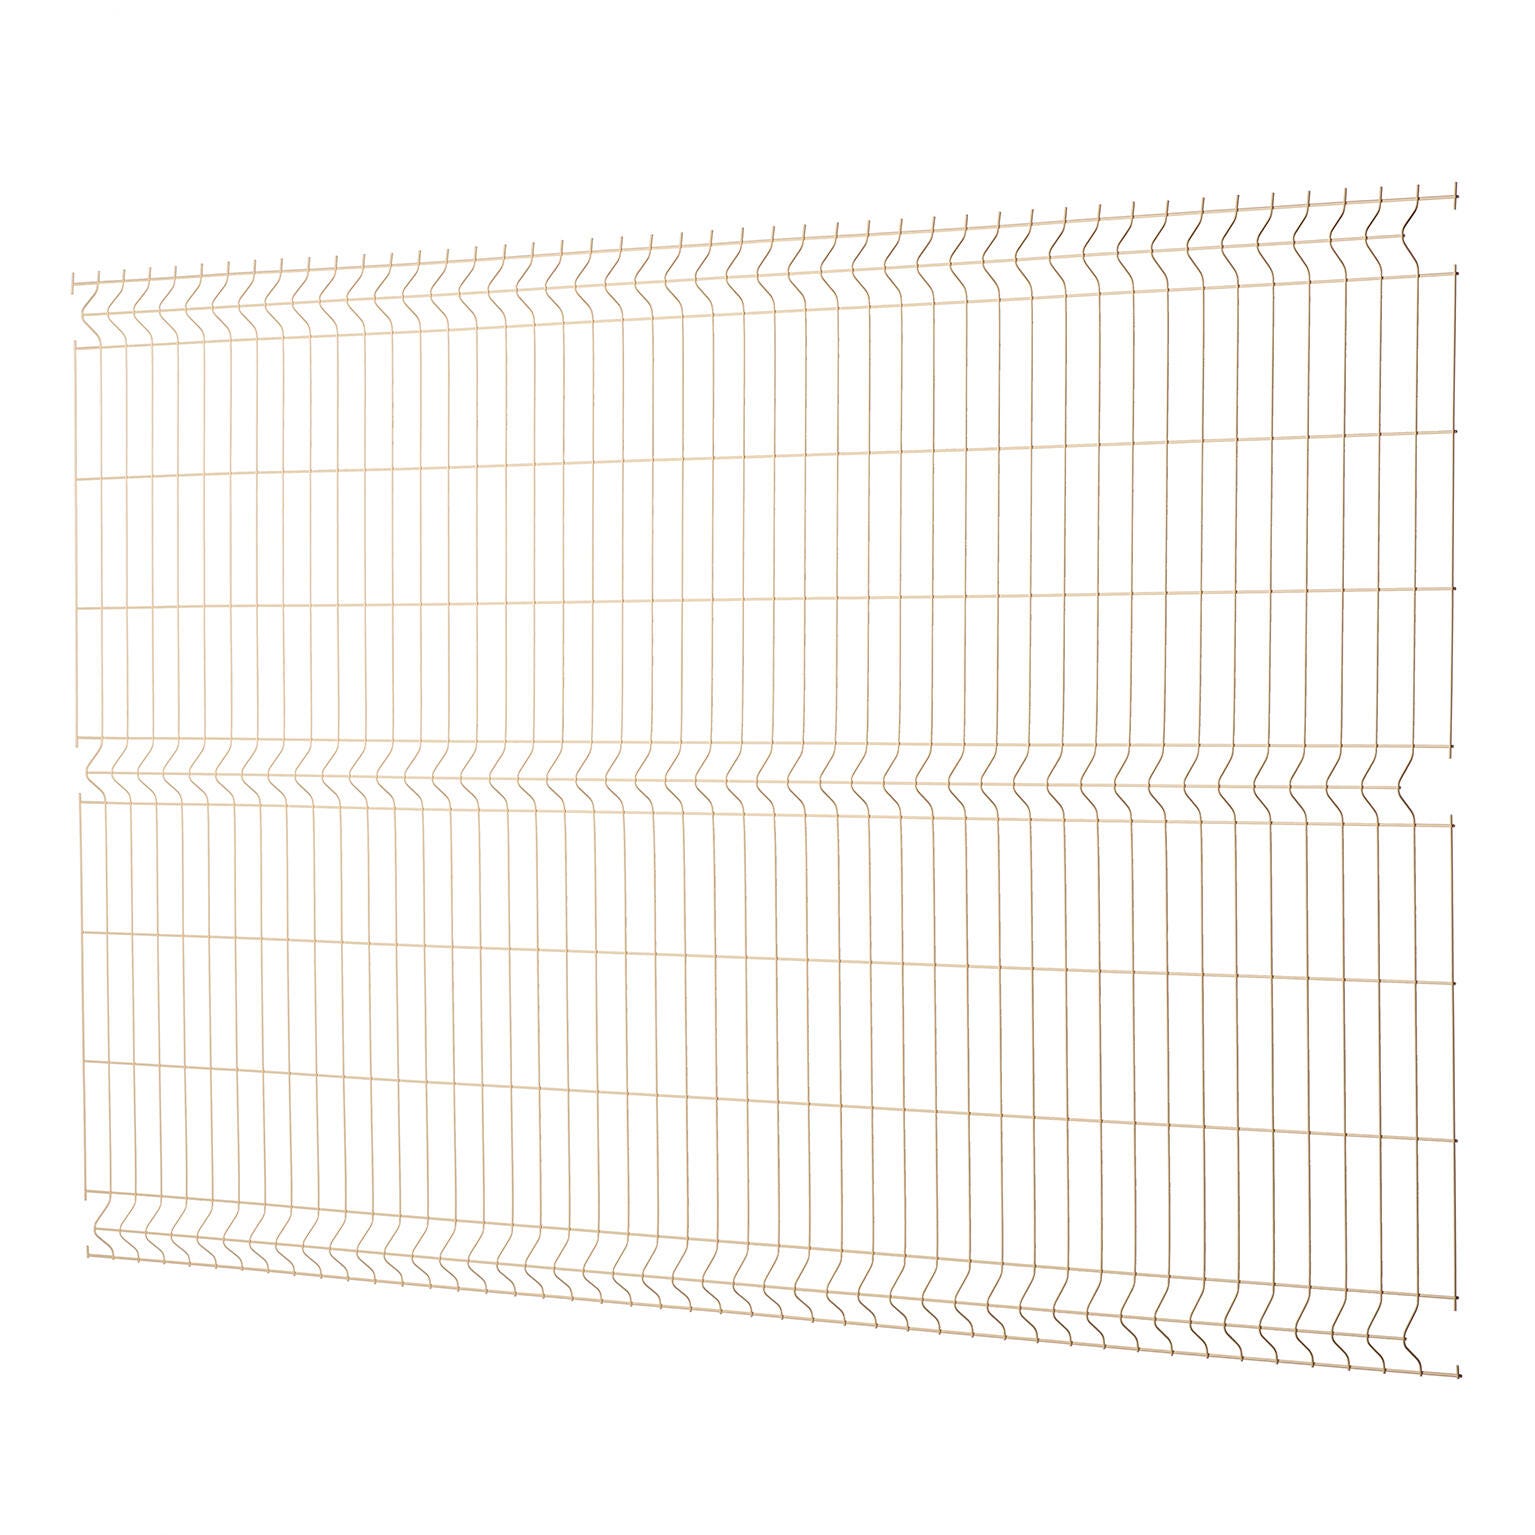 Grillage rigide Naterial blanc H.1 x L.2.5 m, maille 200x55 mm